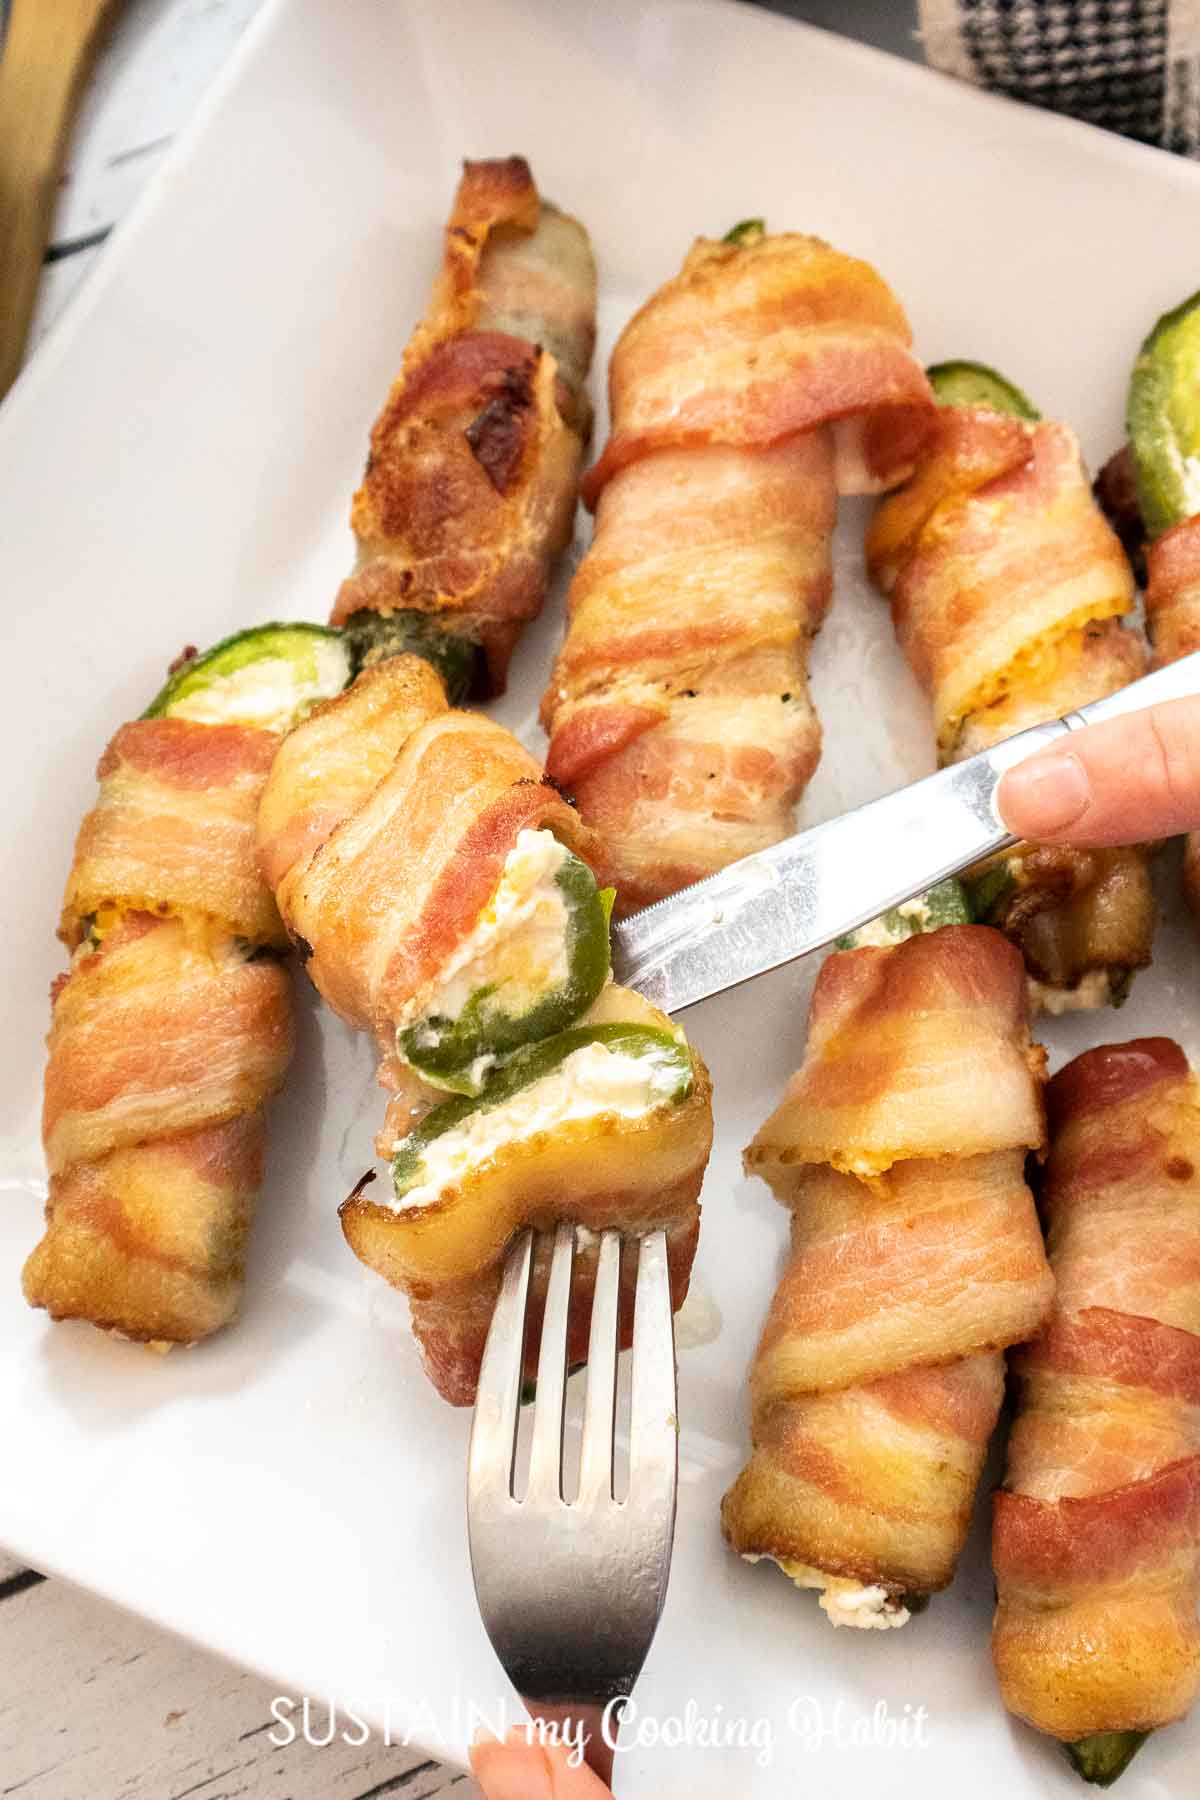 Bacon wrapped jalapeno popper cut open with a fork and knife.